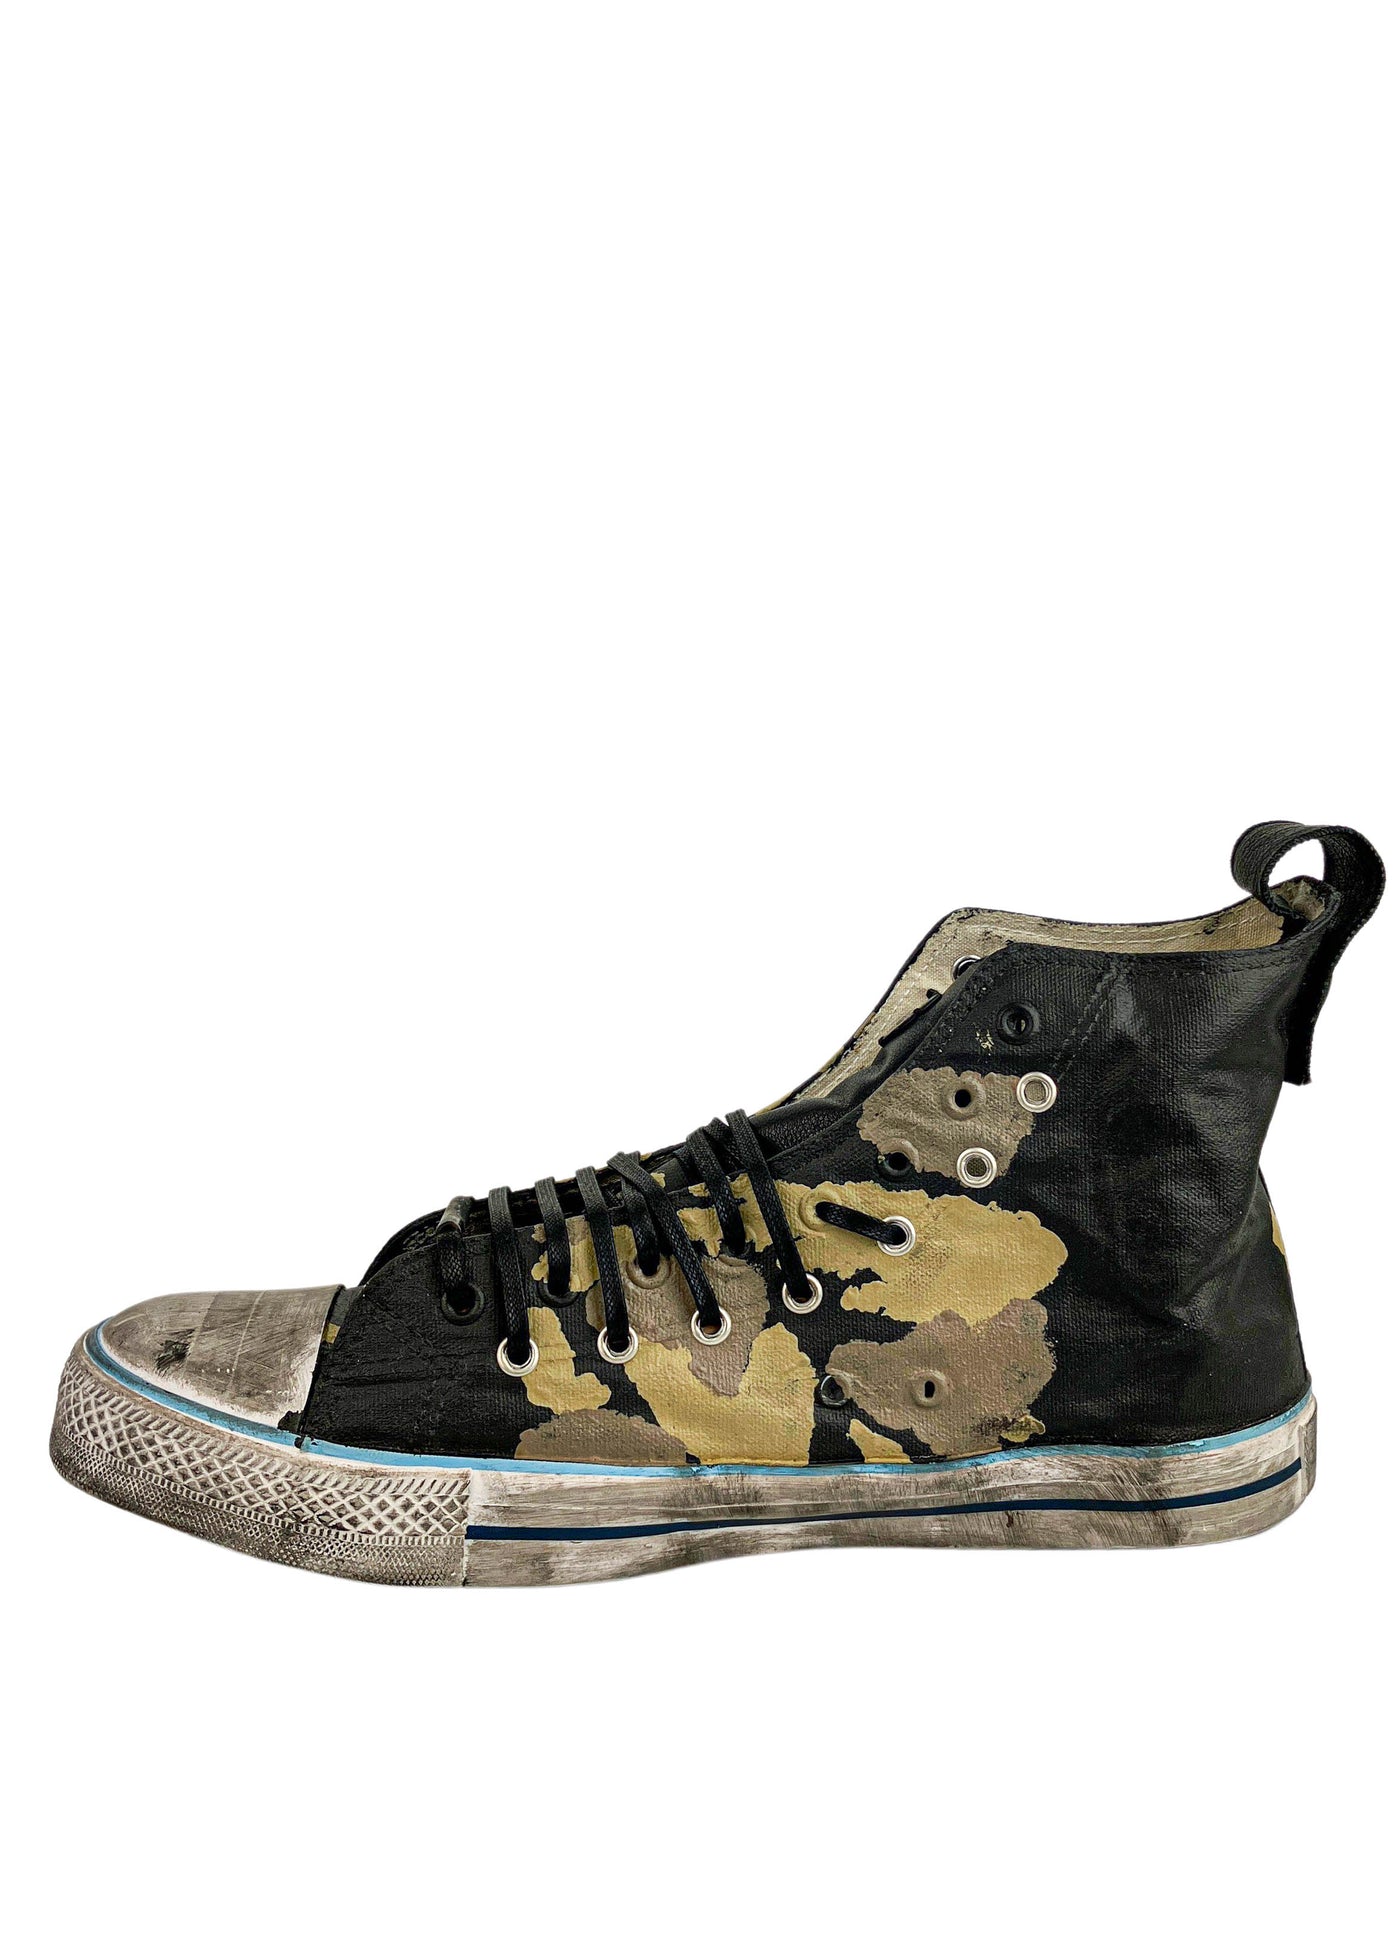 Dioniso High Top Camo Sneakers - Discounts on Dioniso at UAL